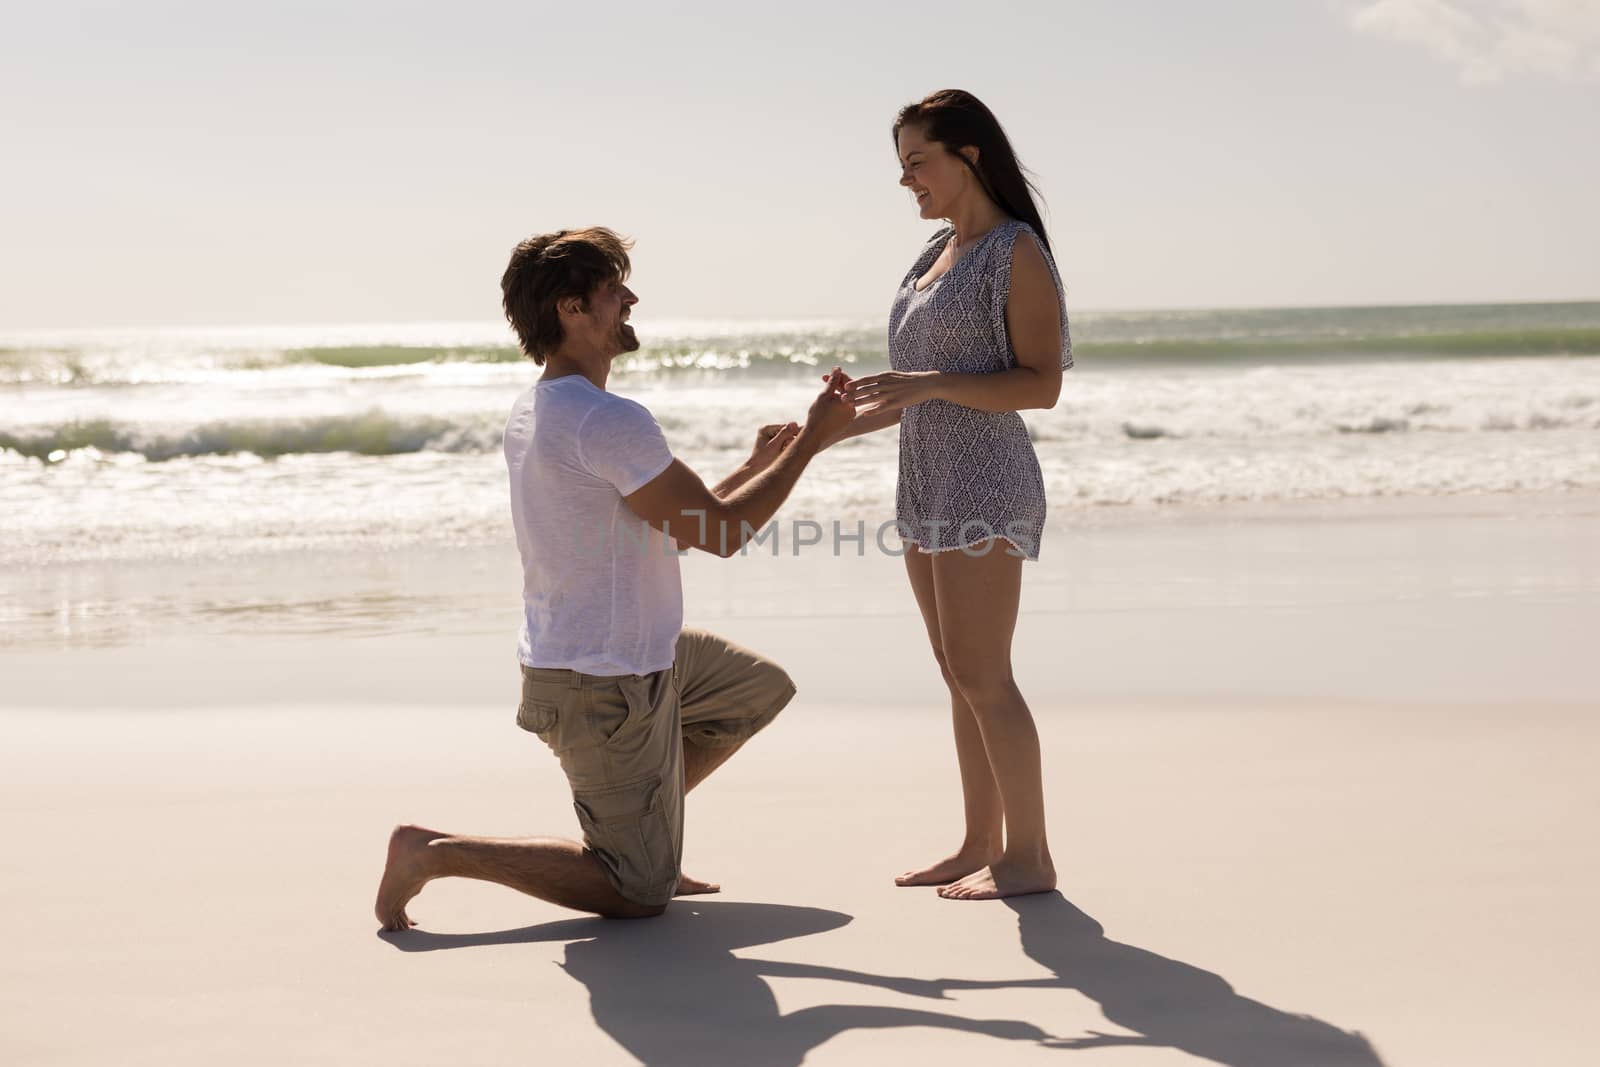 Side view of romantic young man proposing to a woman on his knee at beach in the sunshine